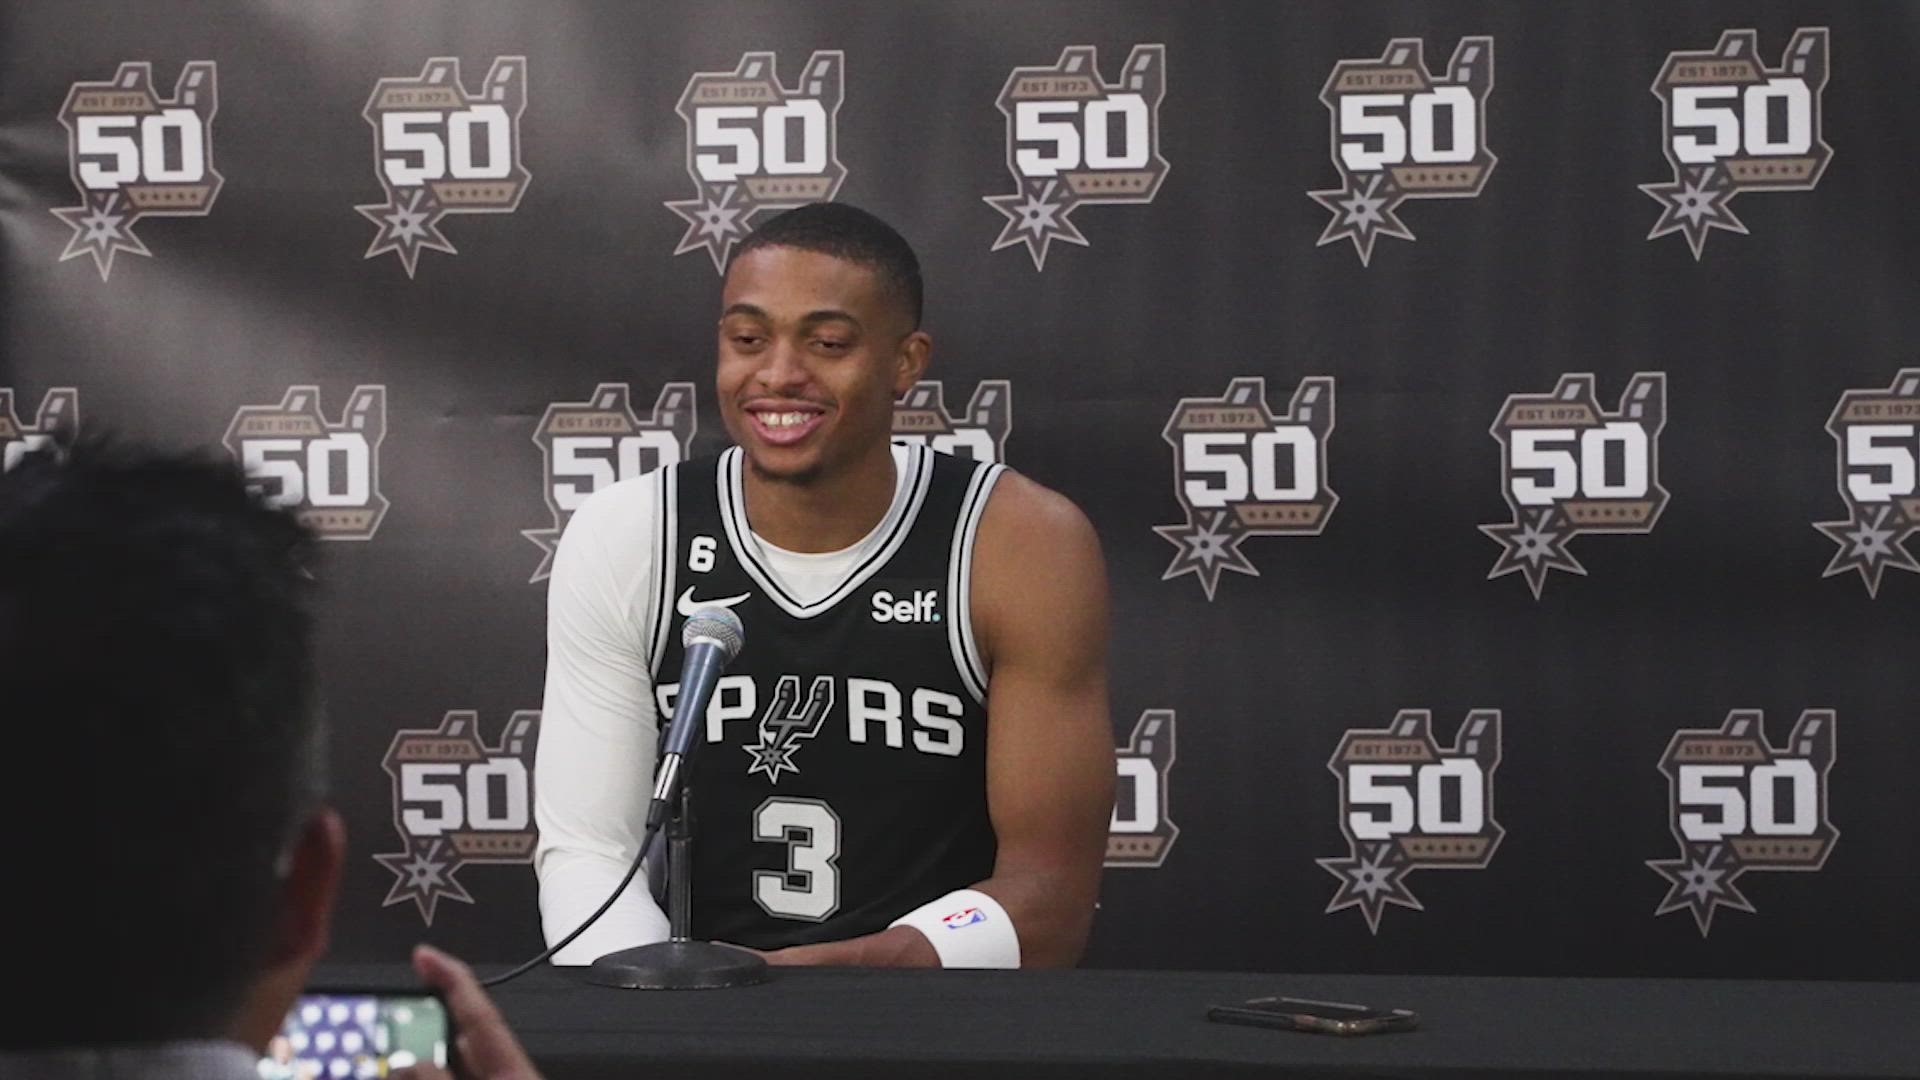 "I definitely want to be the big brother role for any of the younger guys," Johnson said. He's one of the longest tenured Spurs, coming off of a big season.